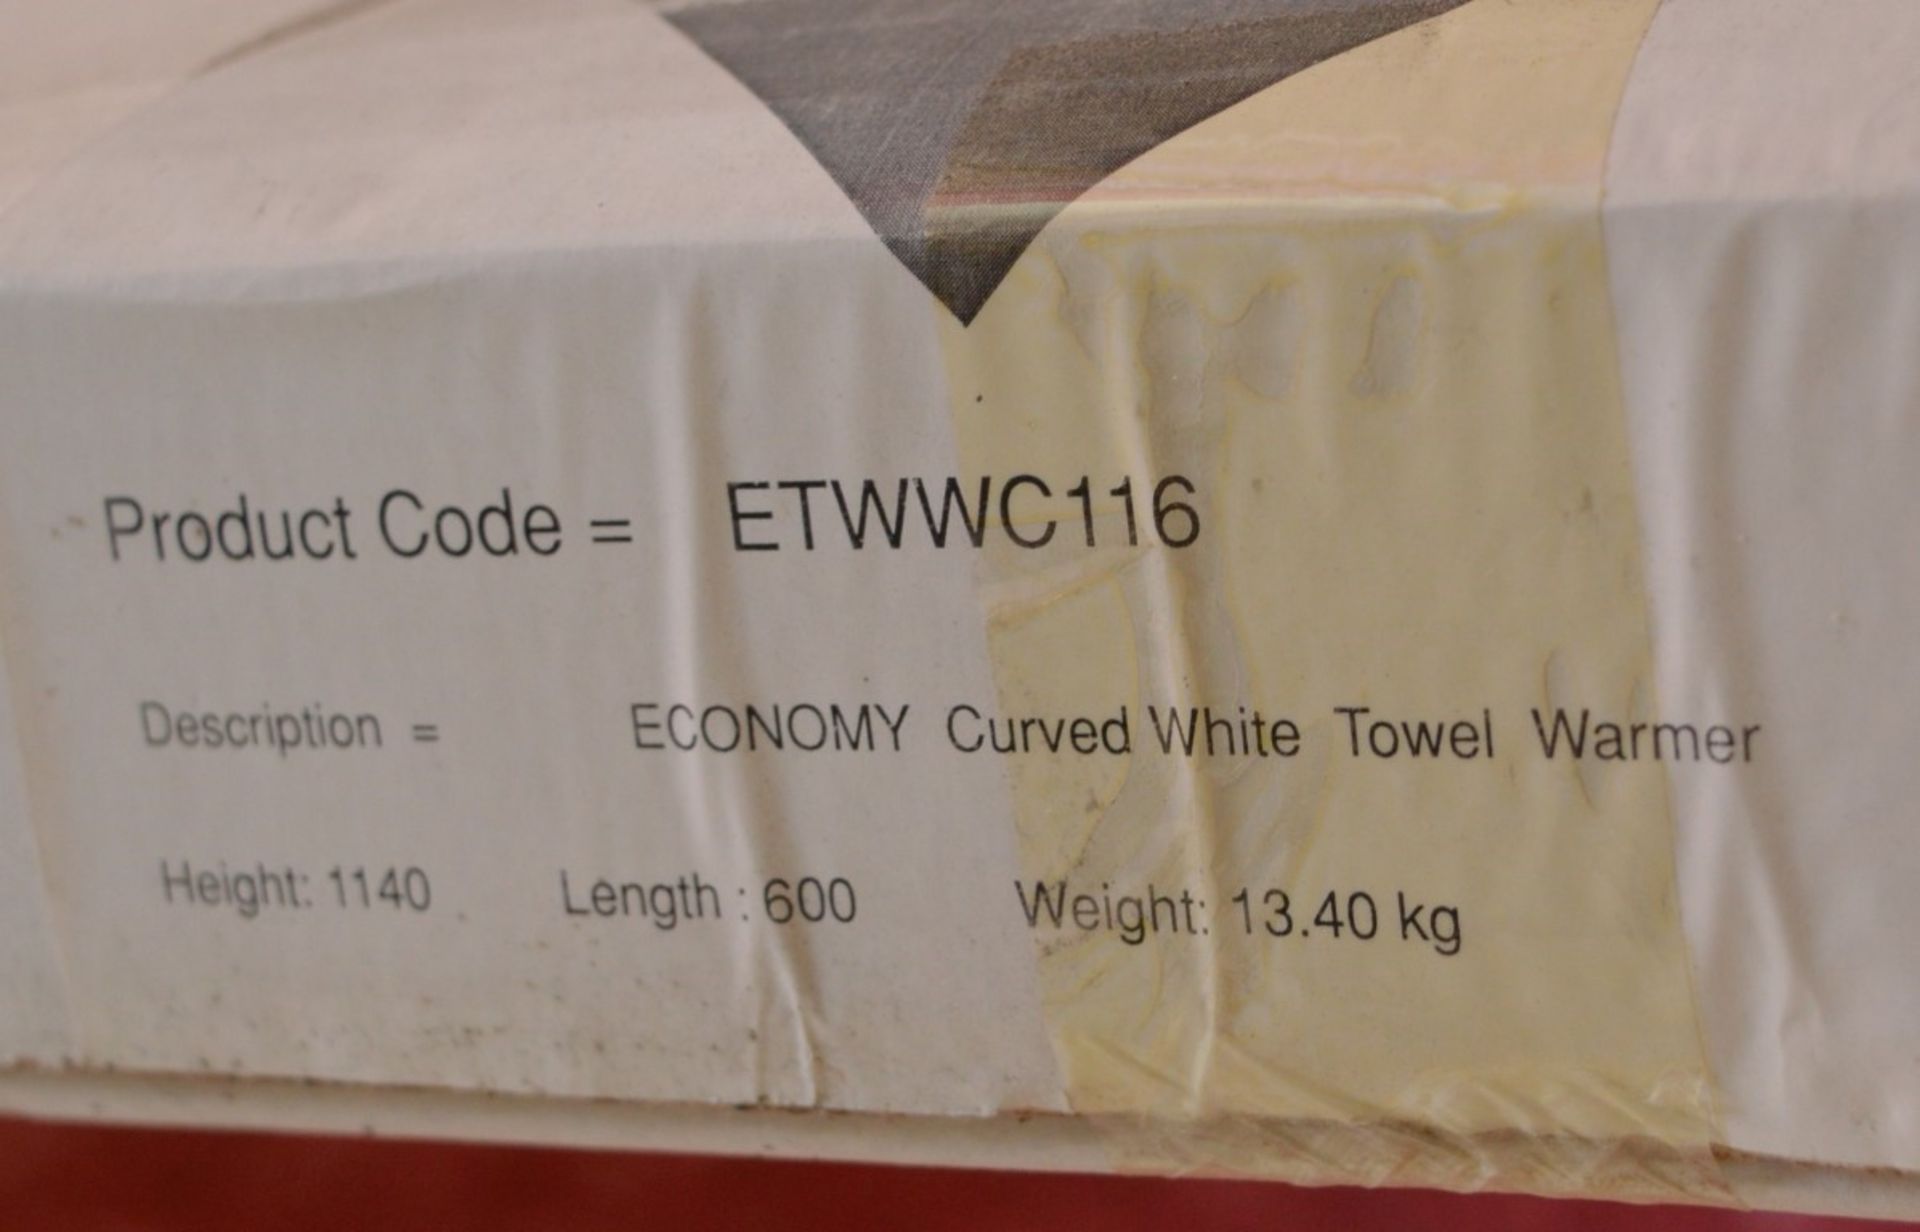 1 x Economy Curved White Bathroom Towel Warmer - Product Code ETWWC116 - H1140 x W600 mm - Brand New - Image 3 of 3